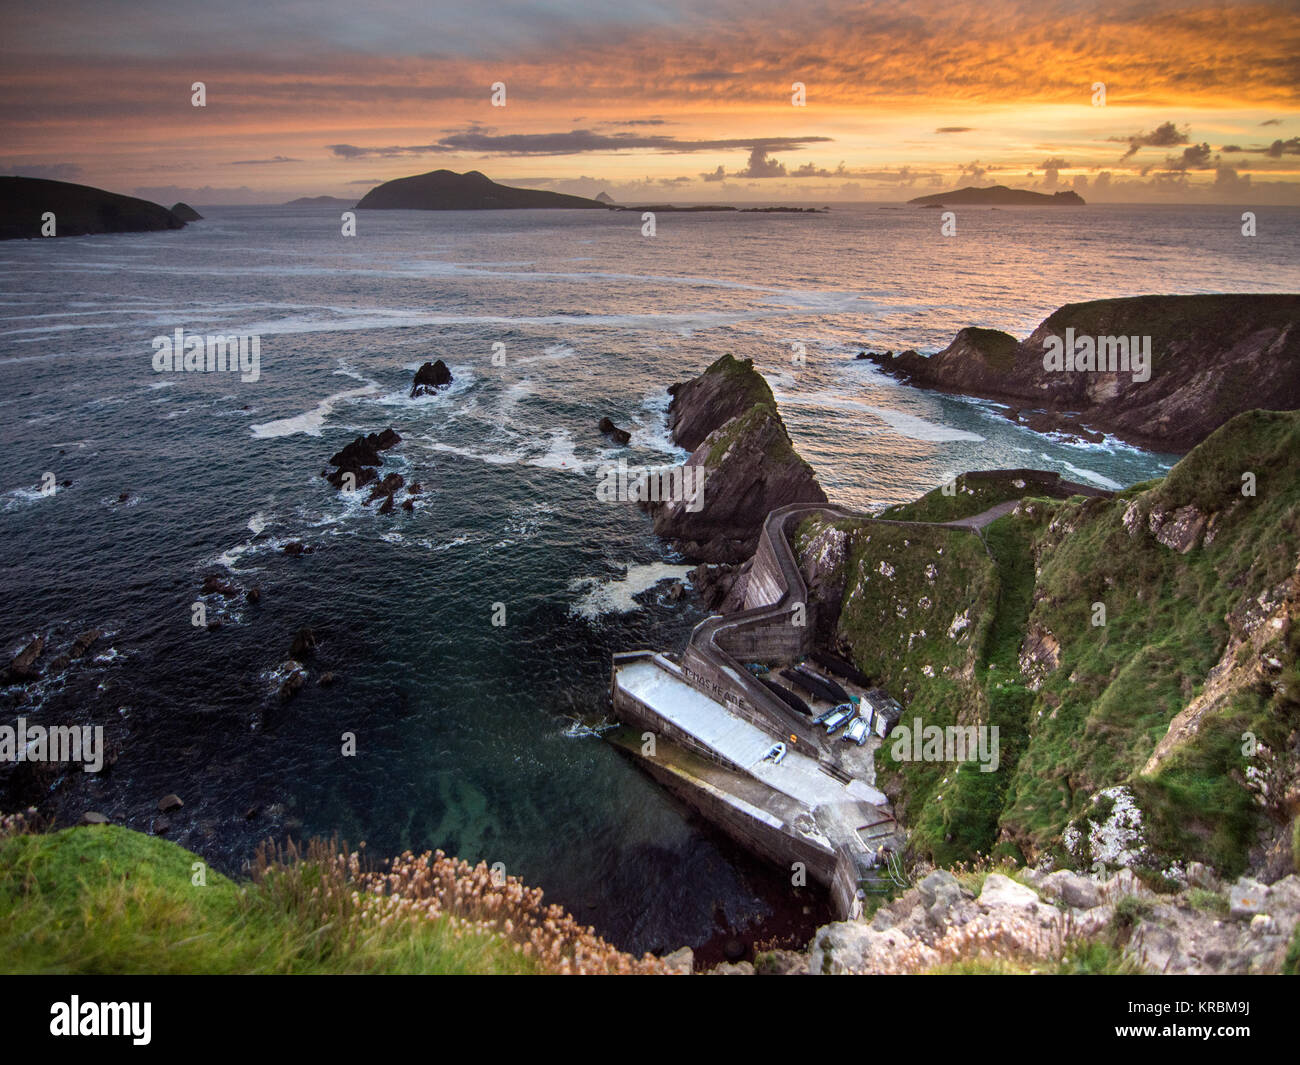 Sunset over Dunquin Pier and the Blasket Islands on the rocky Atlantic coast of Dingle Peninsula in Ireland's County Kerry. Stock Photo